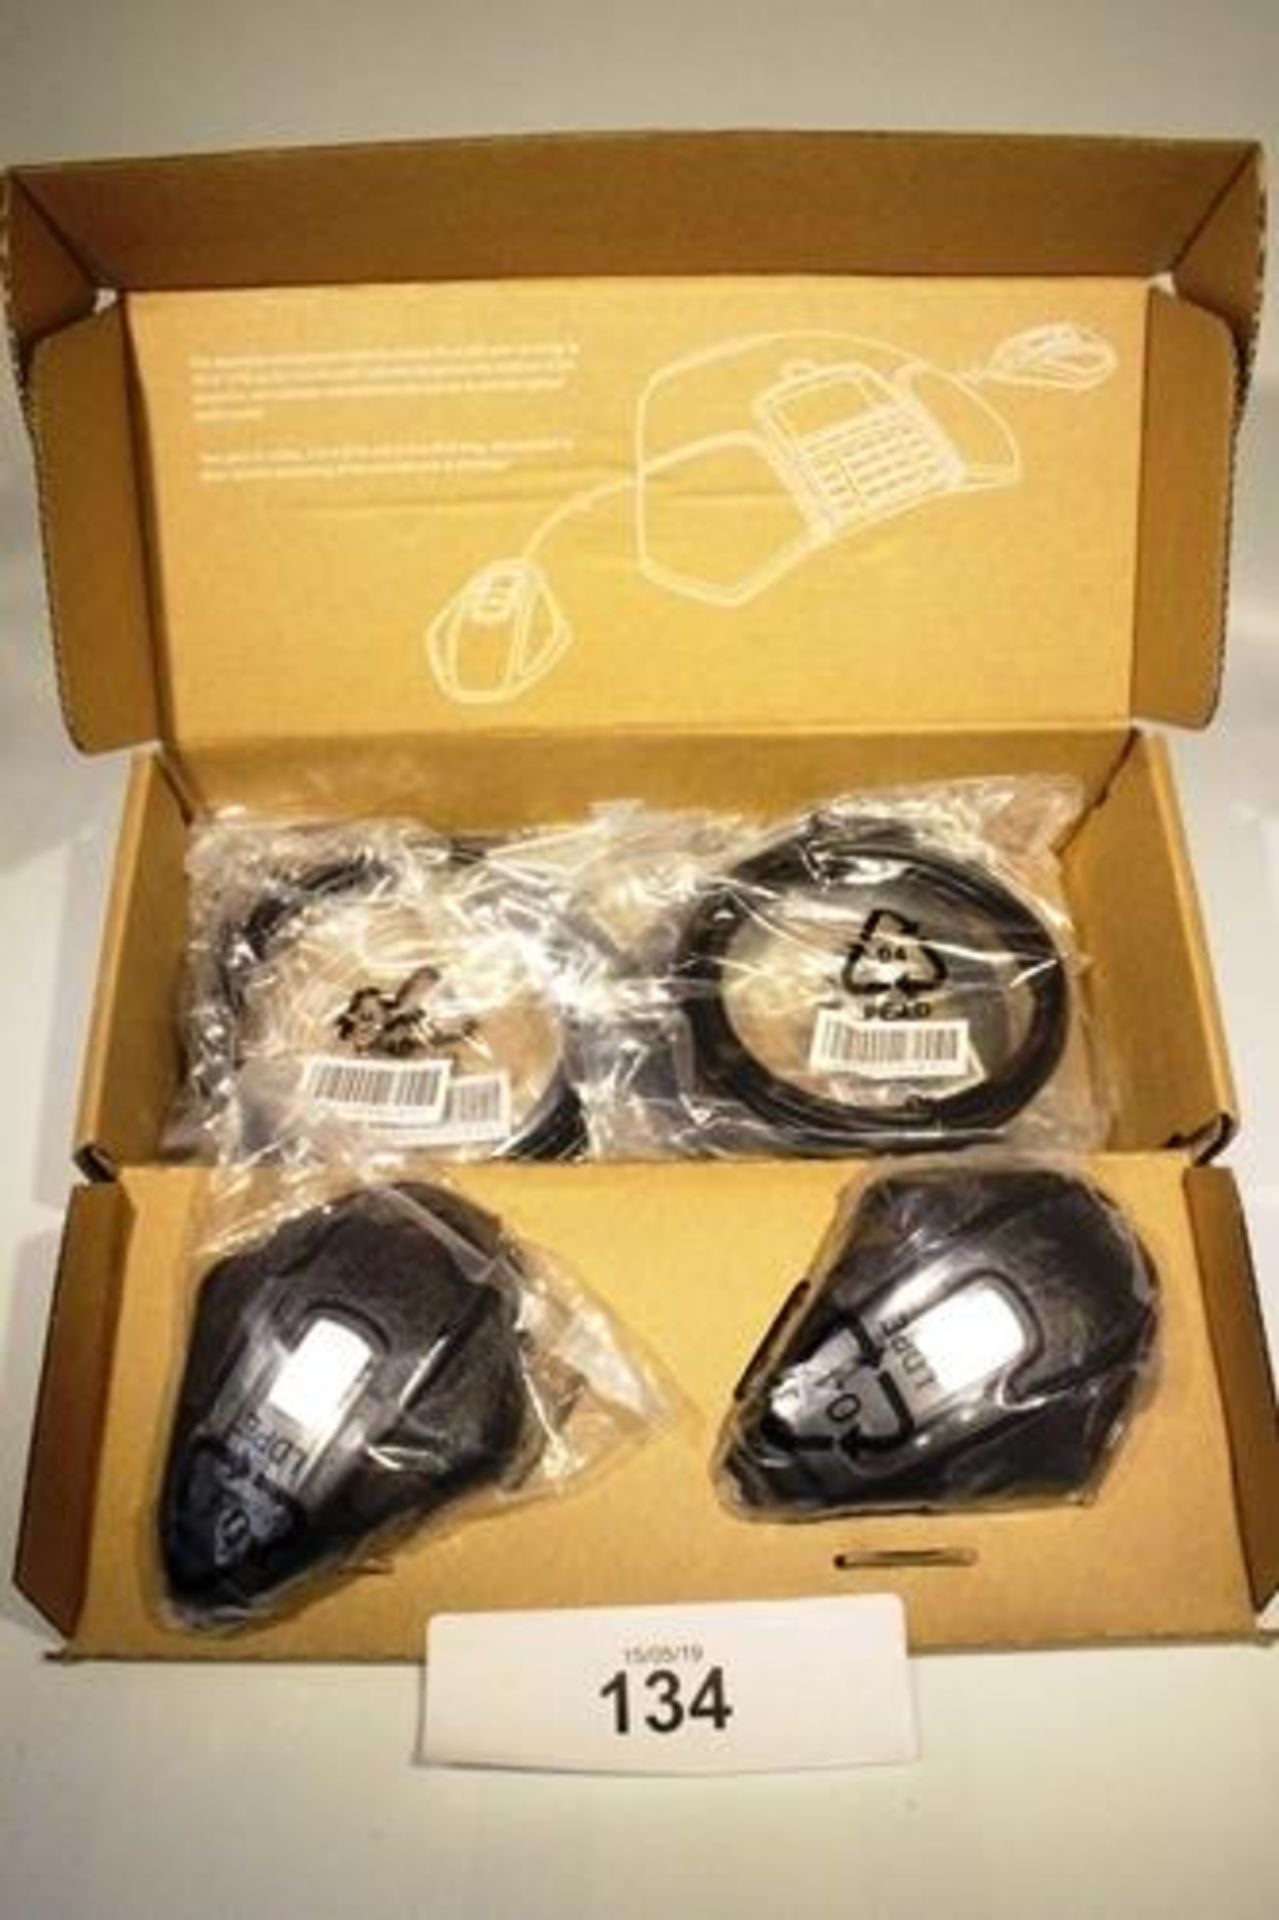 A set of 2 Konftel conference phone expansion micro phones, model 900102113 - New in box (FC2)